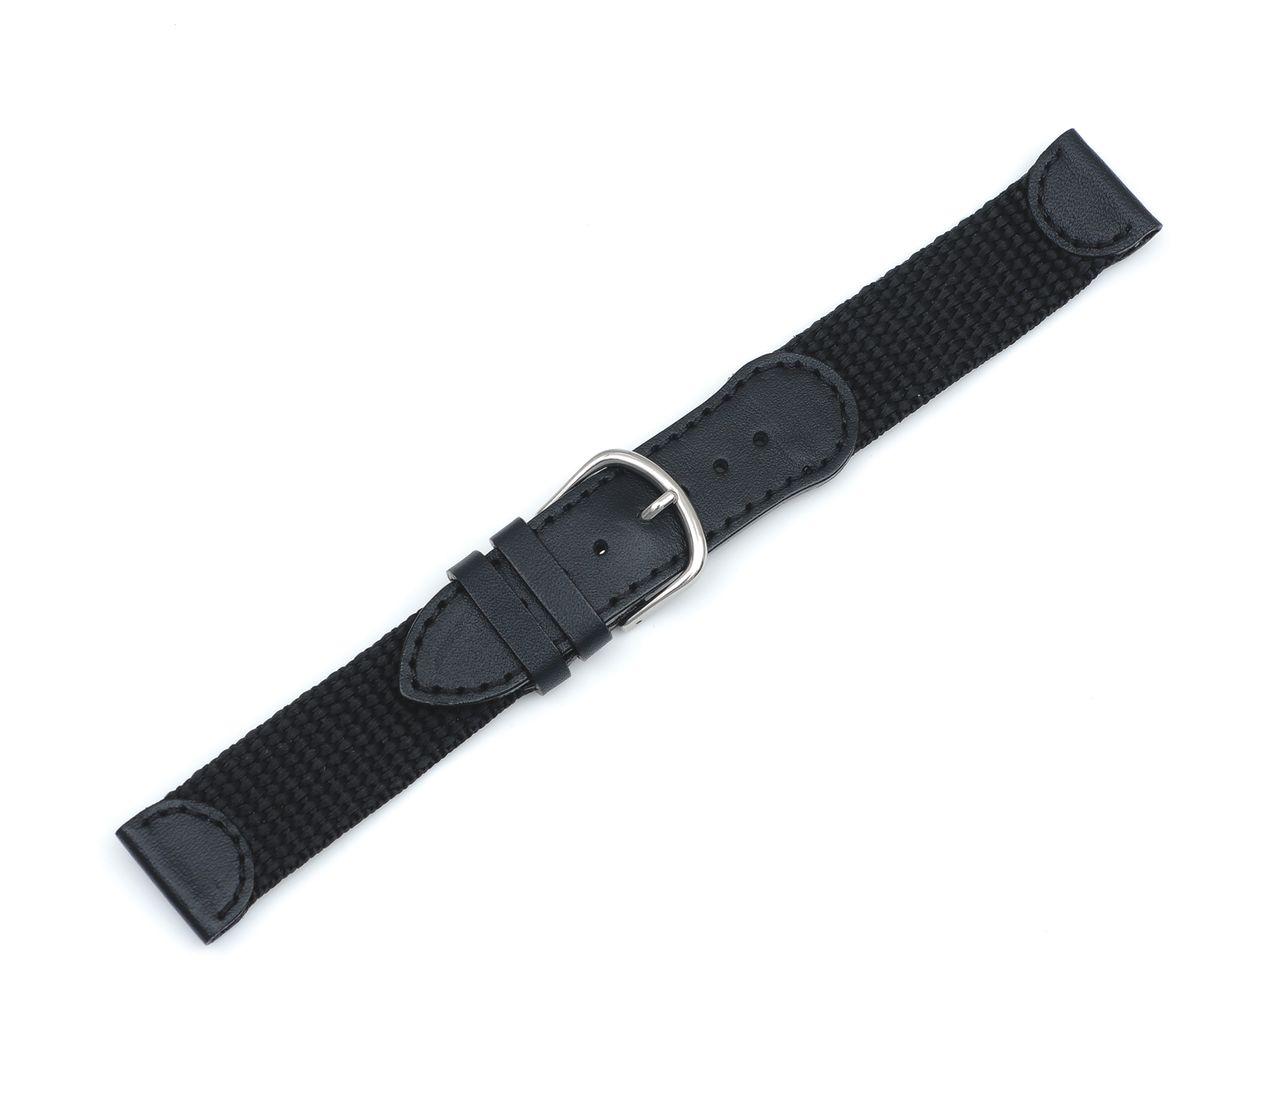 - 19 20001 Leather - mm - in mm Original Black & 0 Nylon Strap buckle with Victorinox